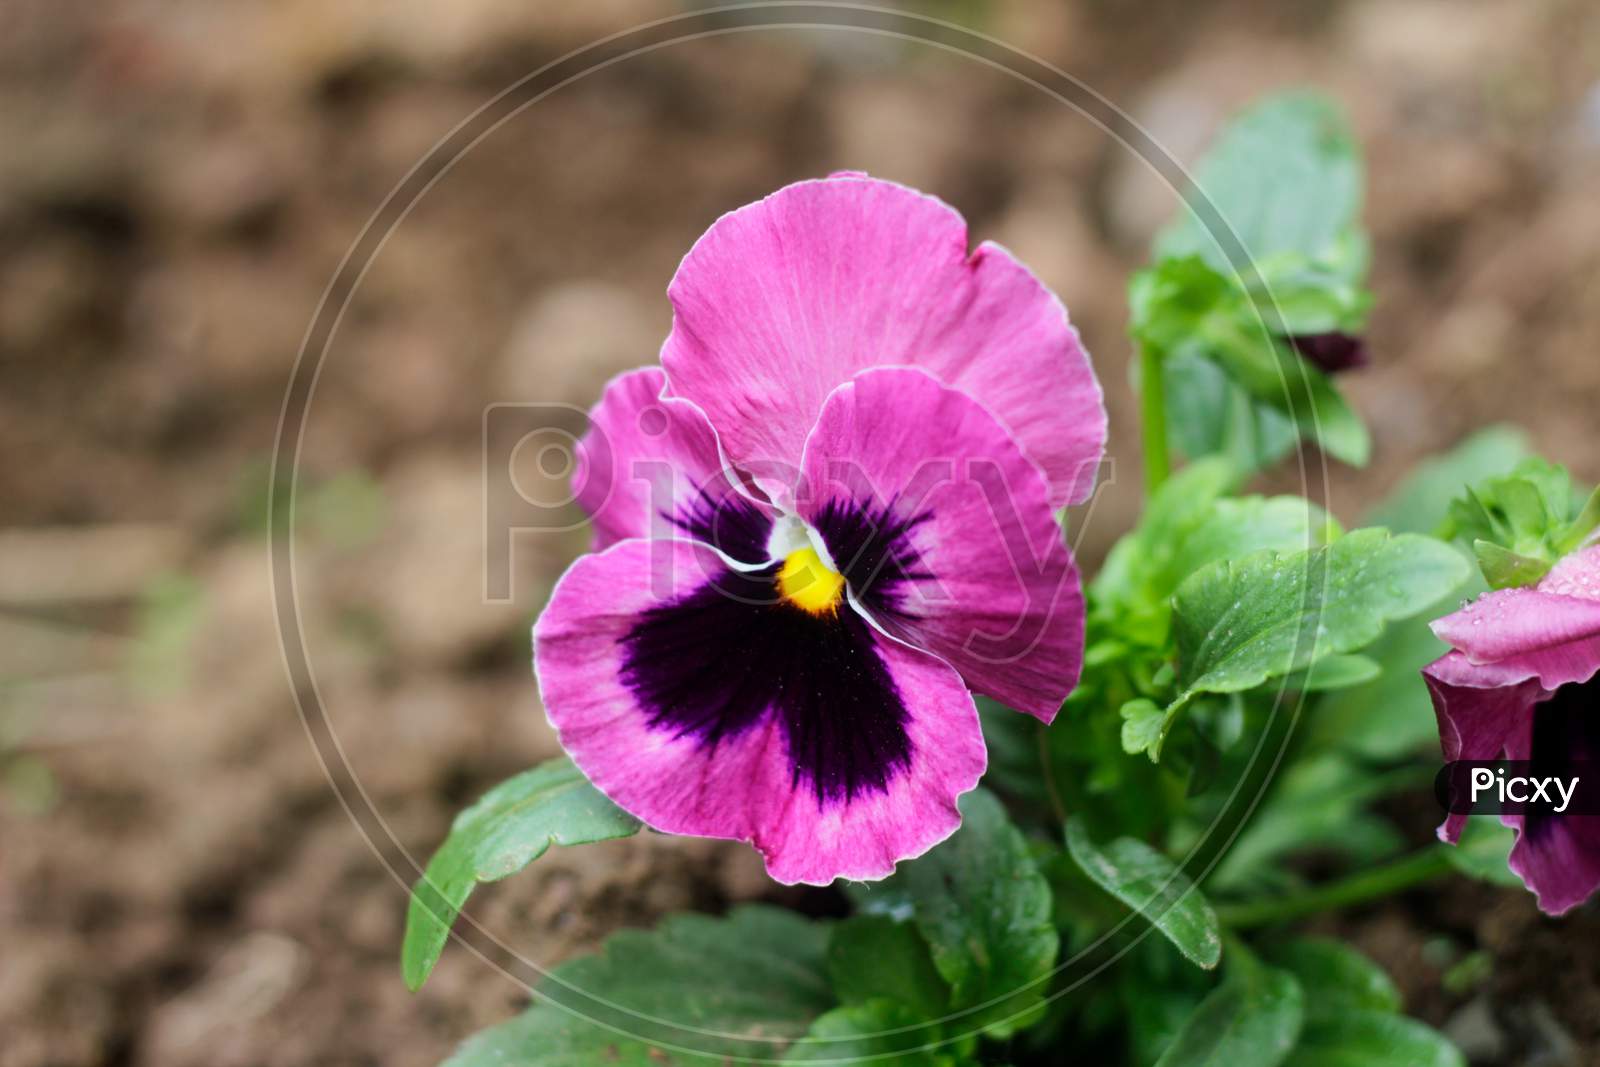 Pansy Flower With Blurry Background